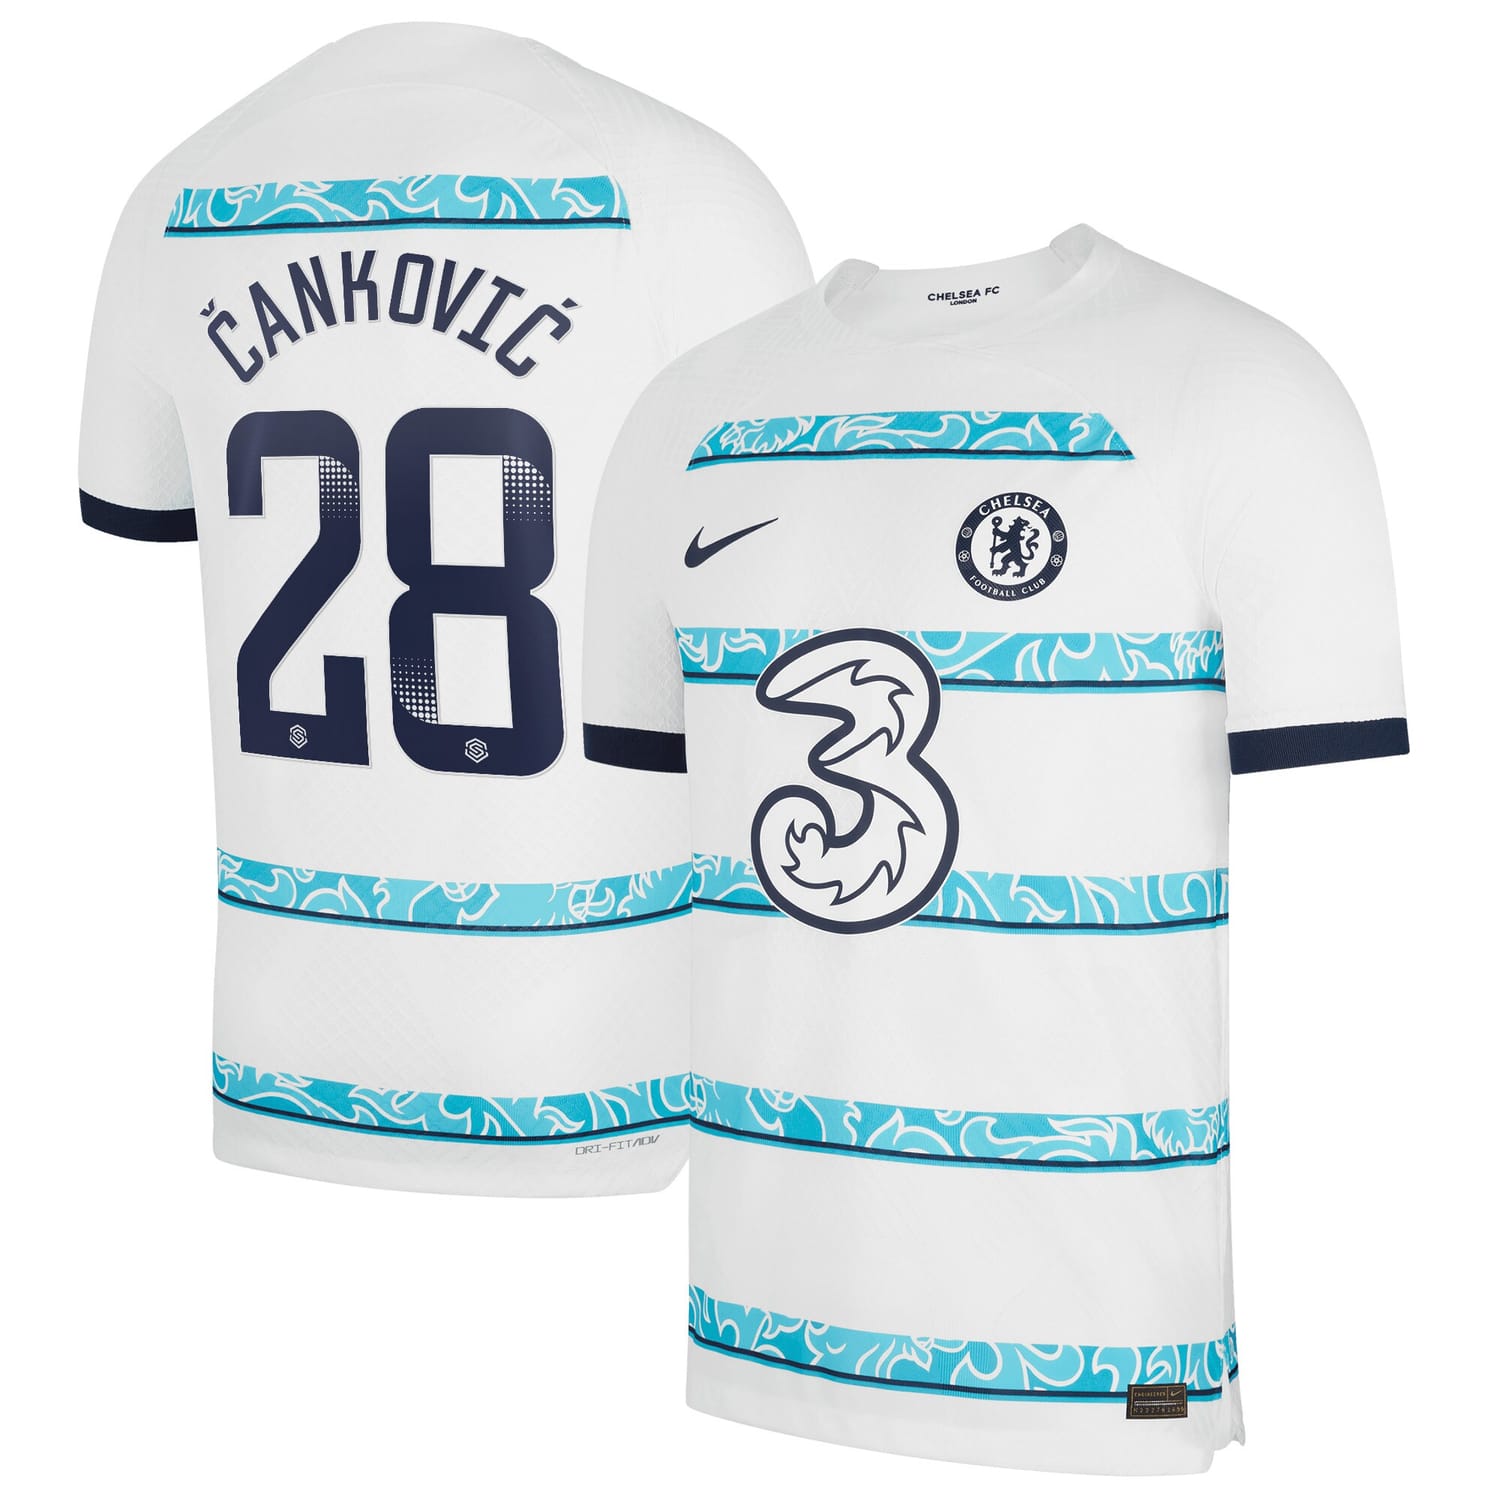 Premier League Chelsea Away WSL Authentic Jersey Shirt 2022-23 player Jelena Cankovic 28 printing for Men